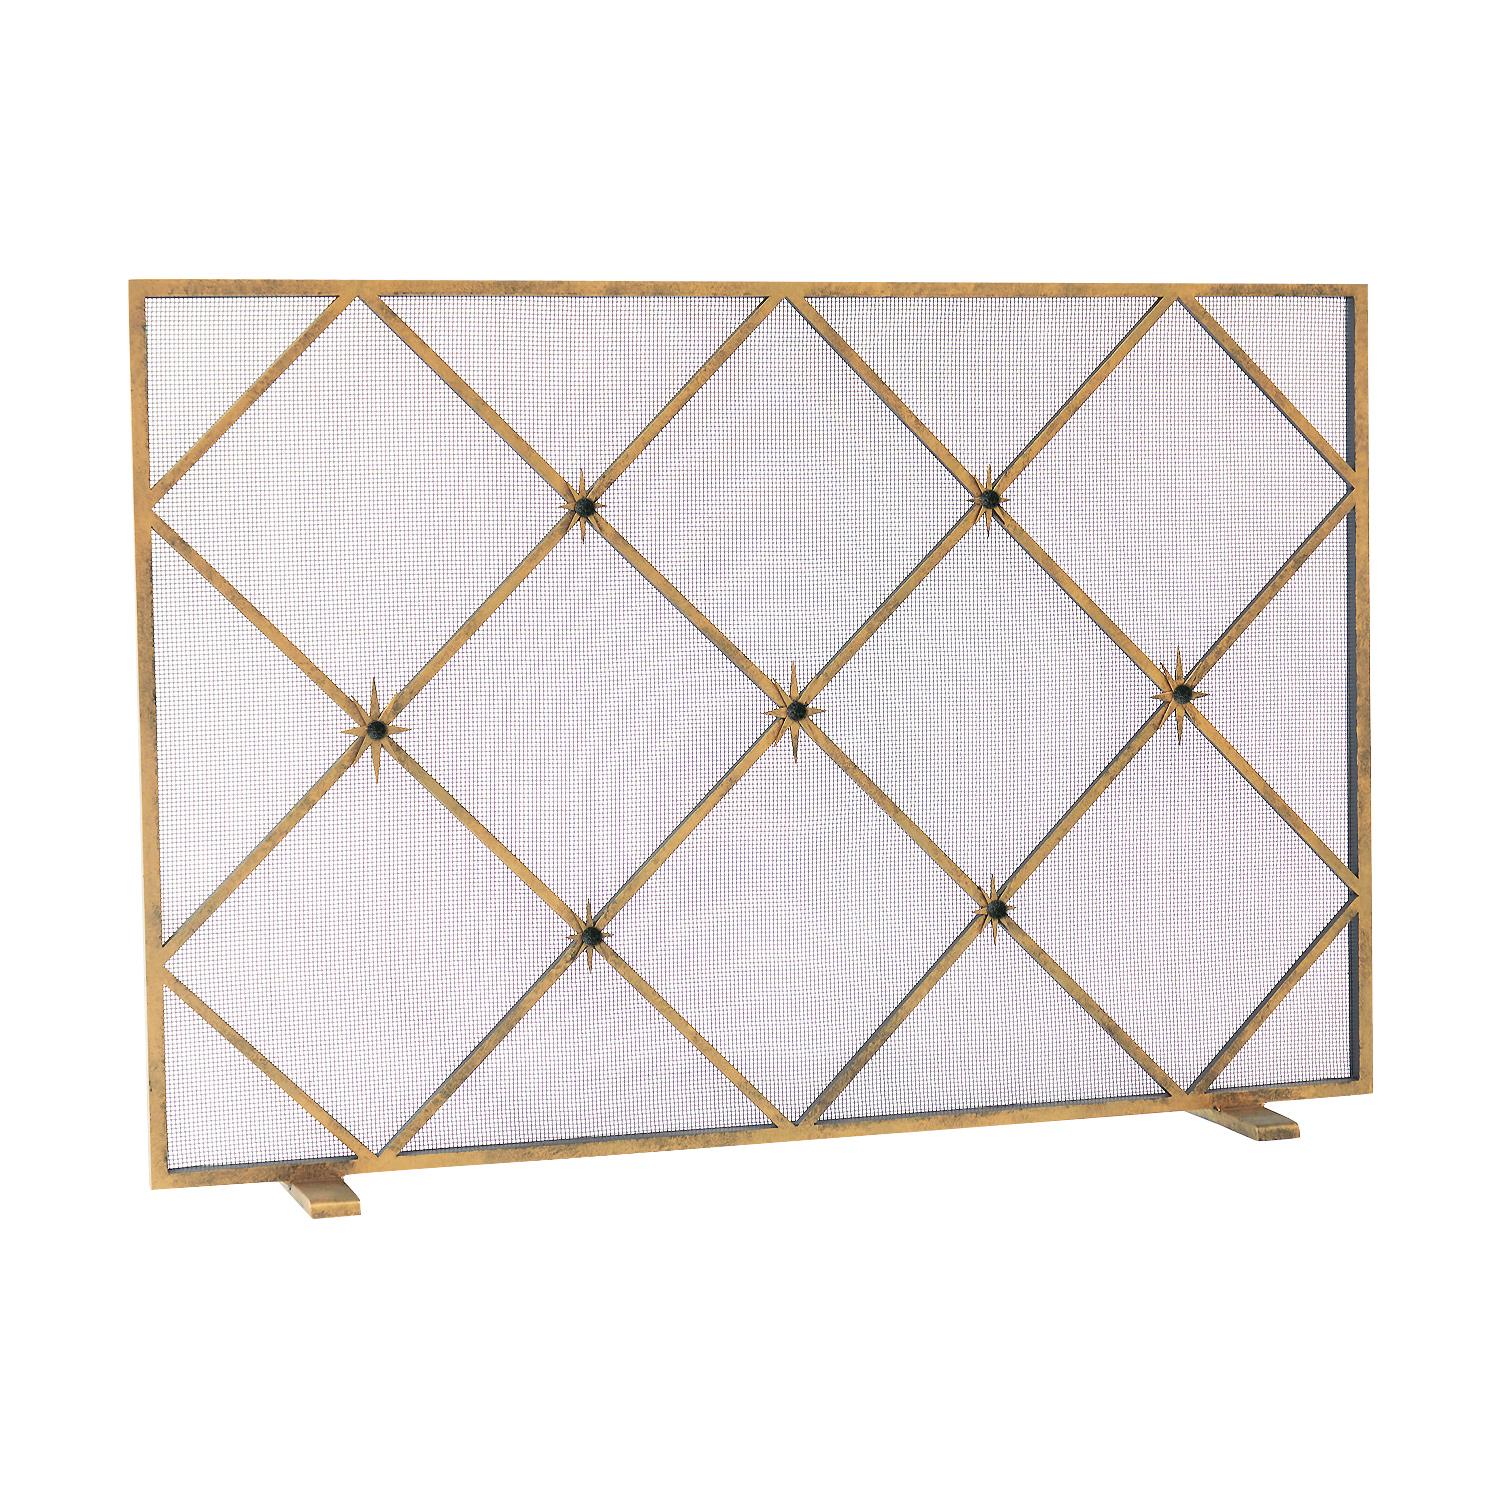 American Celeste Fireplace Screen in Aged Gold For Sale